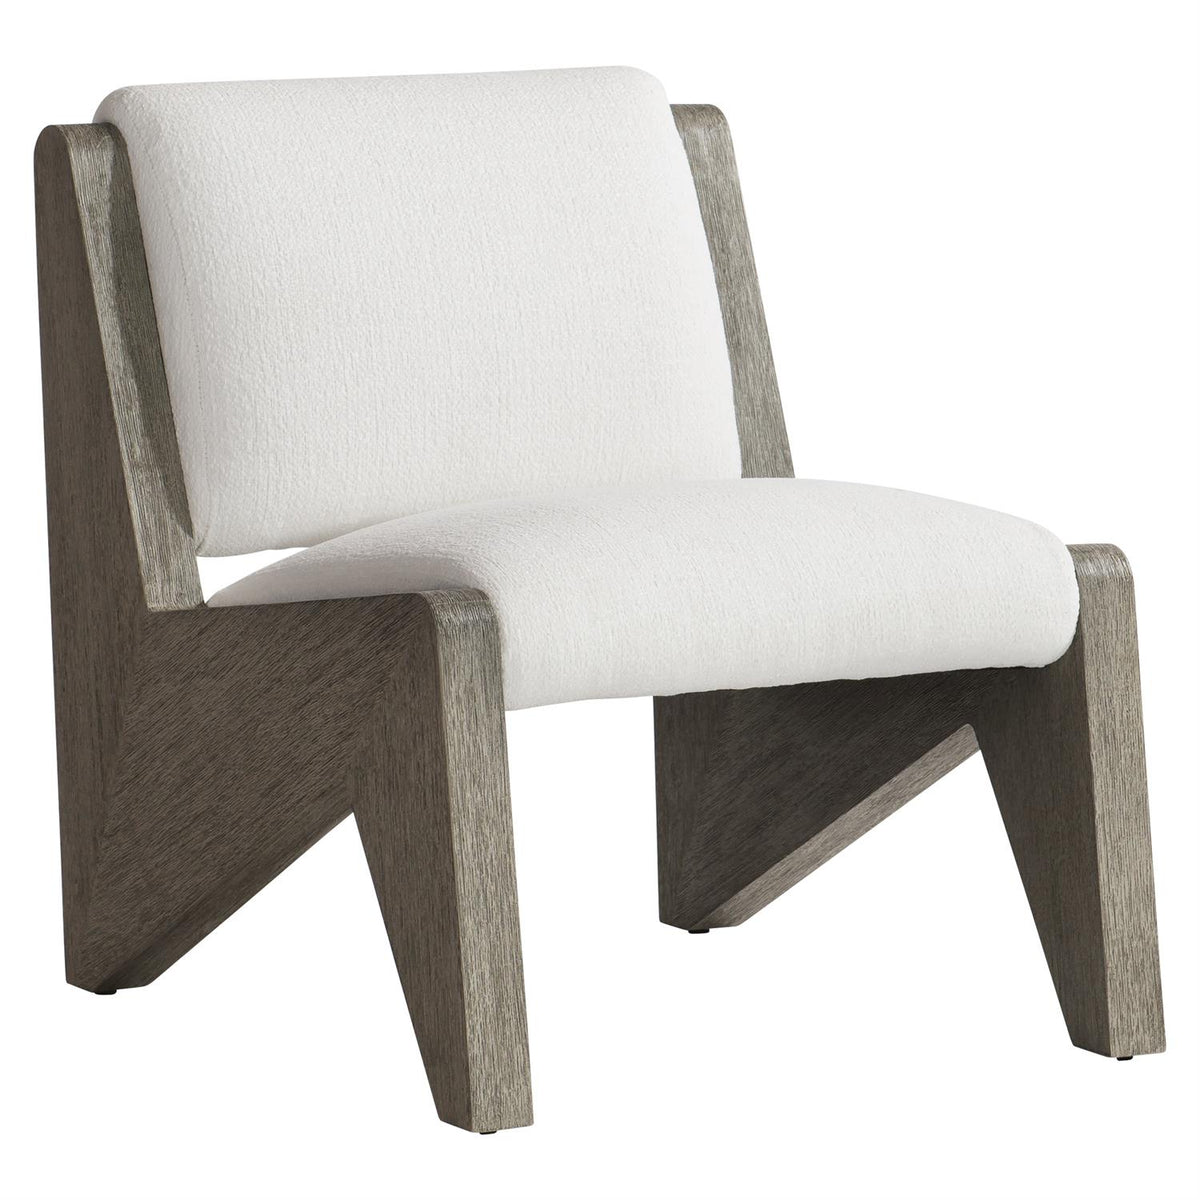 Milly Outdoor Chair